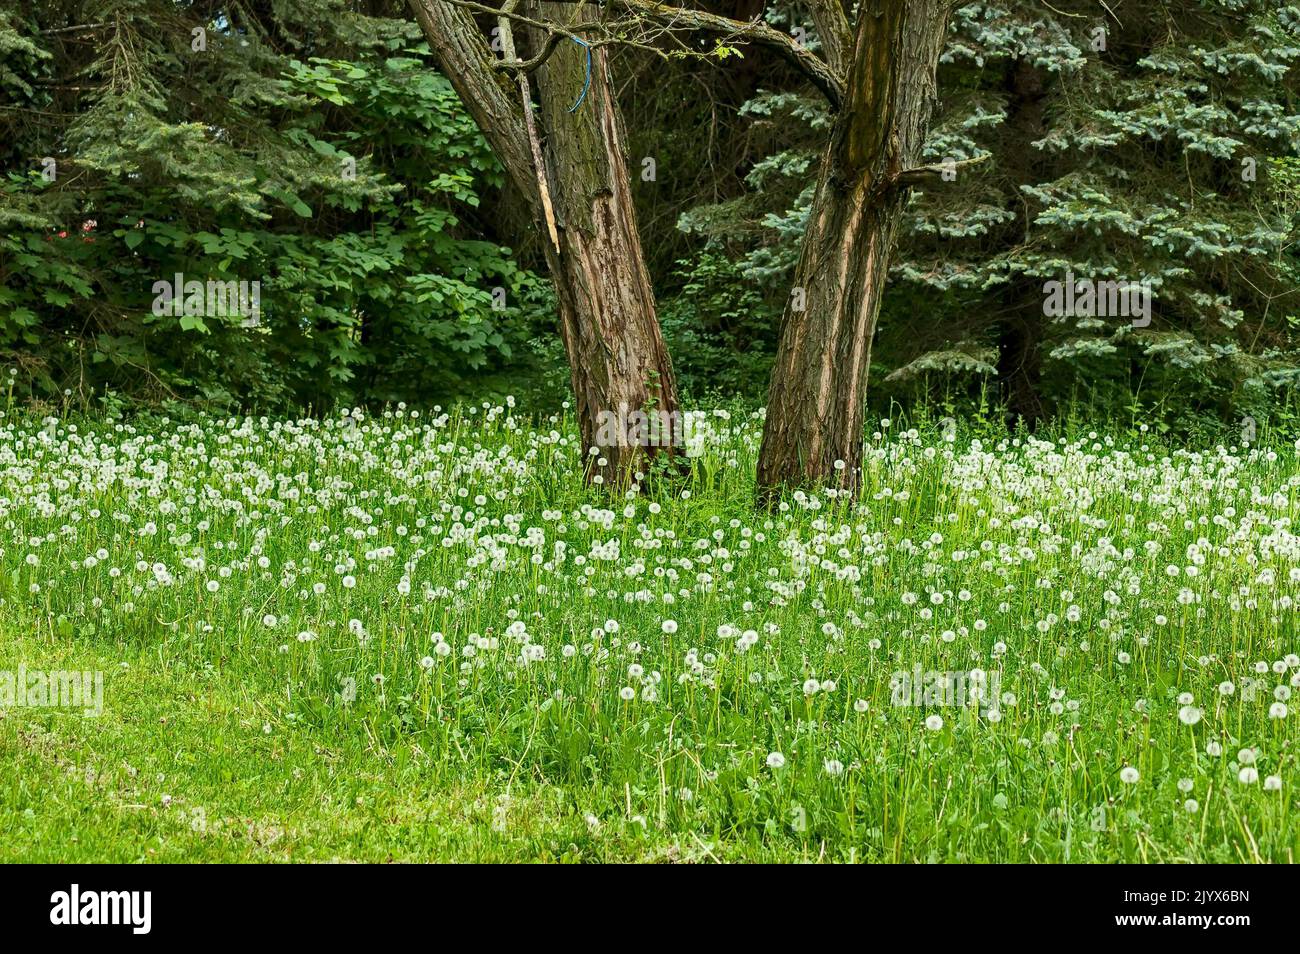 View of a meadow with flowering white dandelions or Tarataxum officinale against a background of forest in South Park, Sofia, Bulgaria Stock Photo